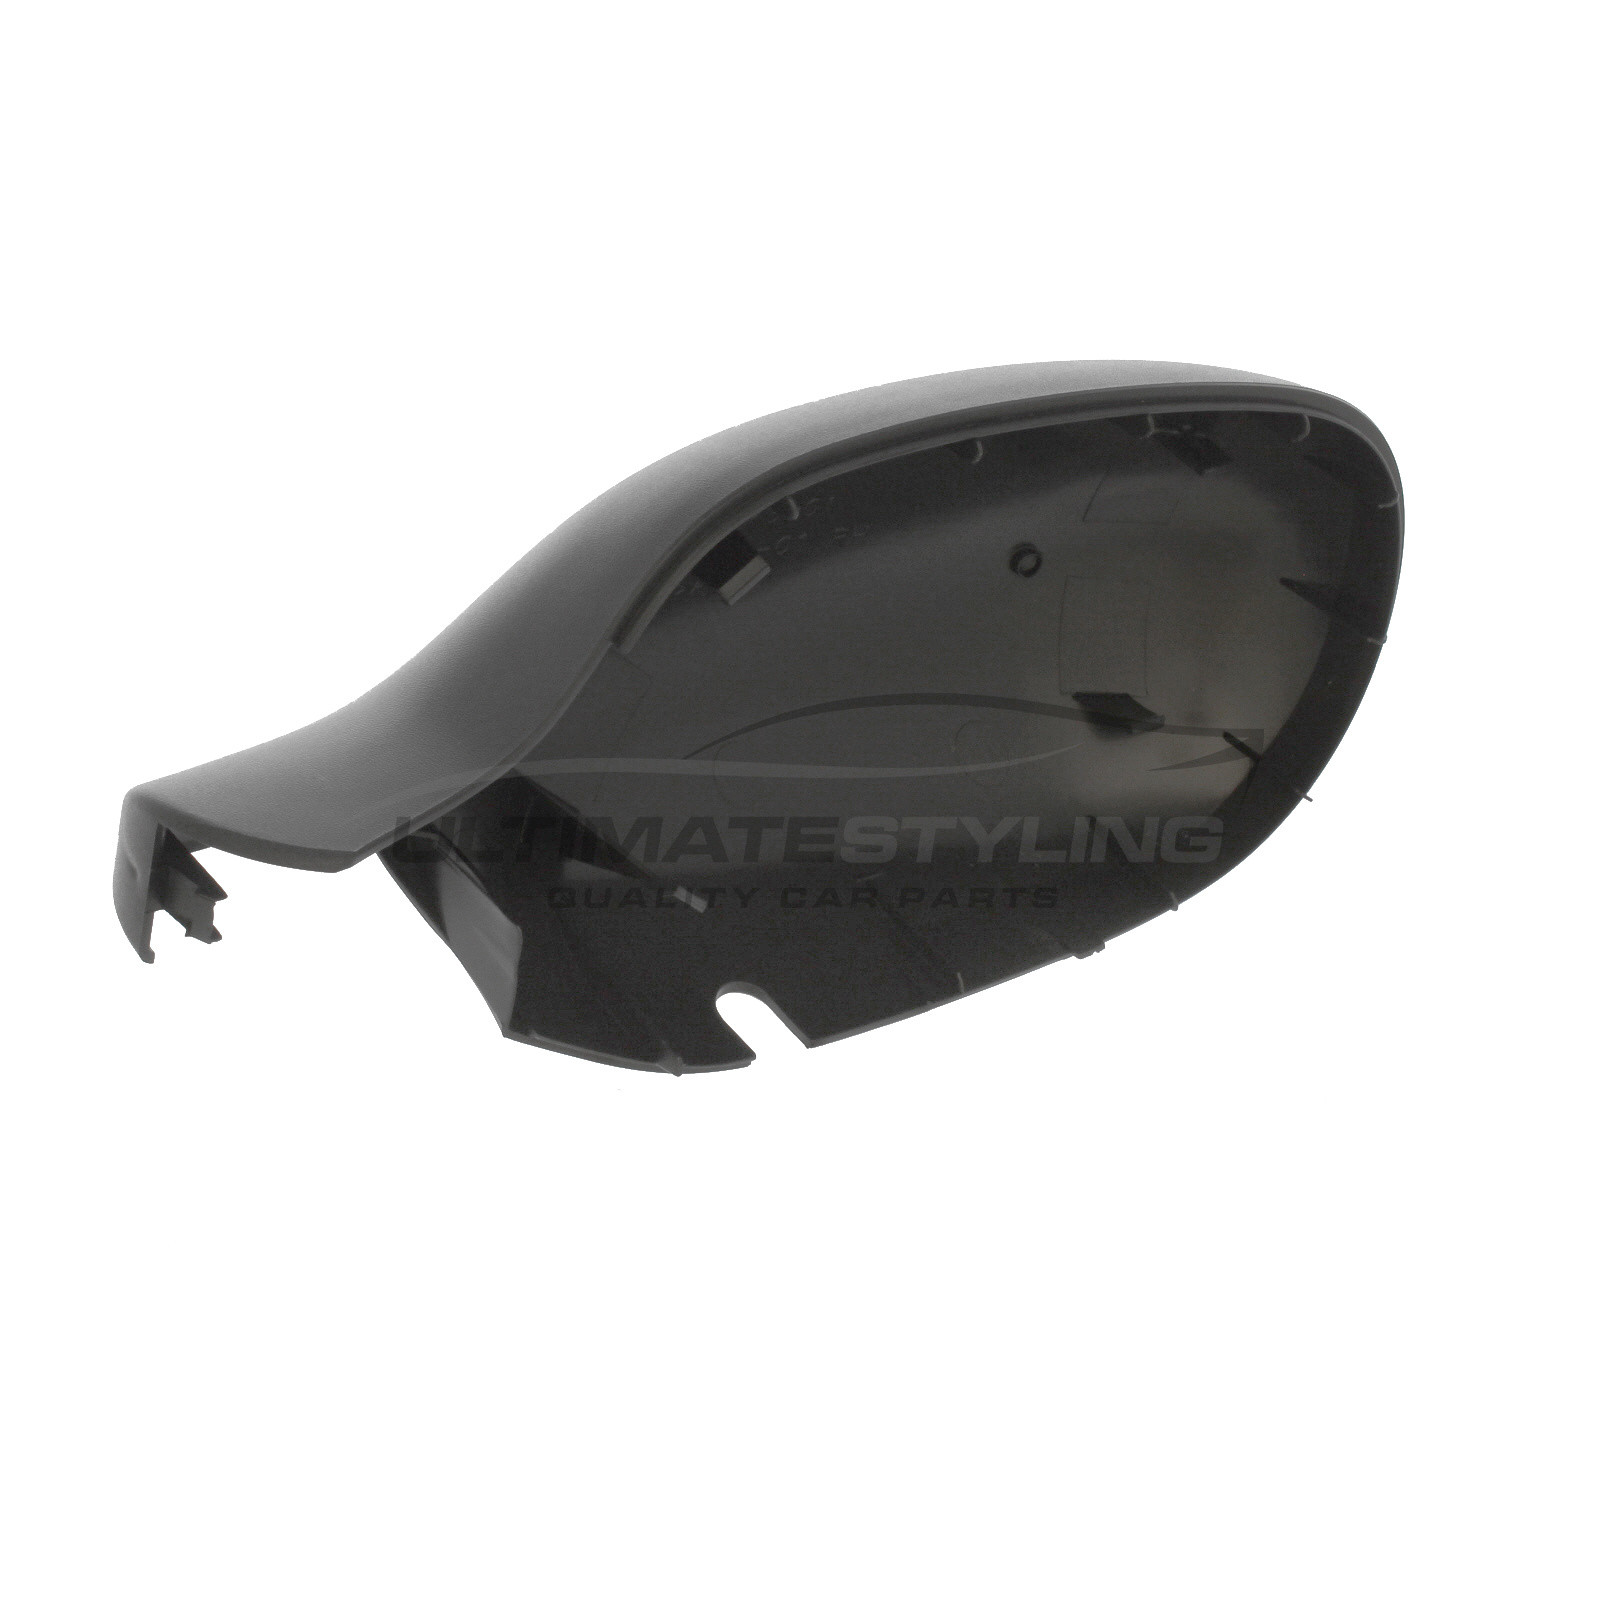 Renault Scenic 1999-2003, Renault Clio 2001-2009, Renault Megane 1996-2003  Wing Mirror Cover Cap Casing Black (Textured) Drivers Side (RH)